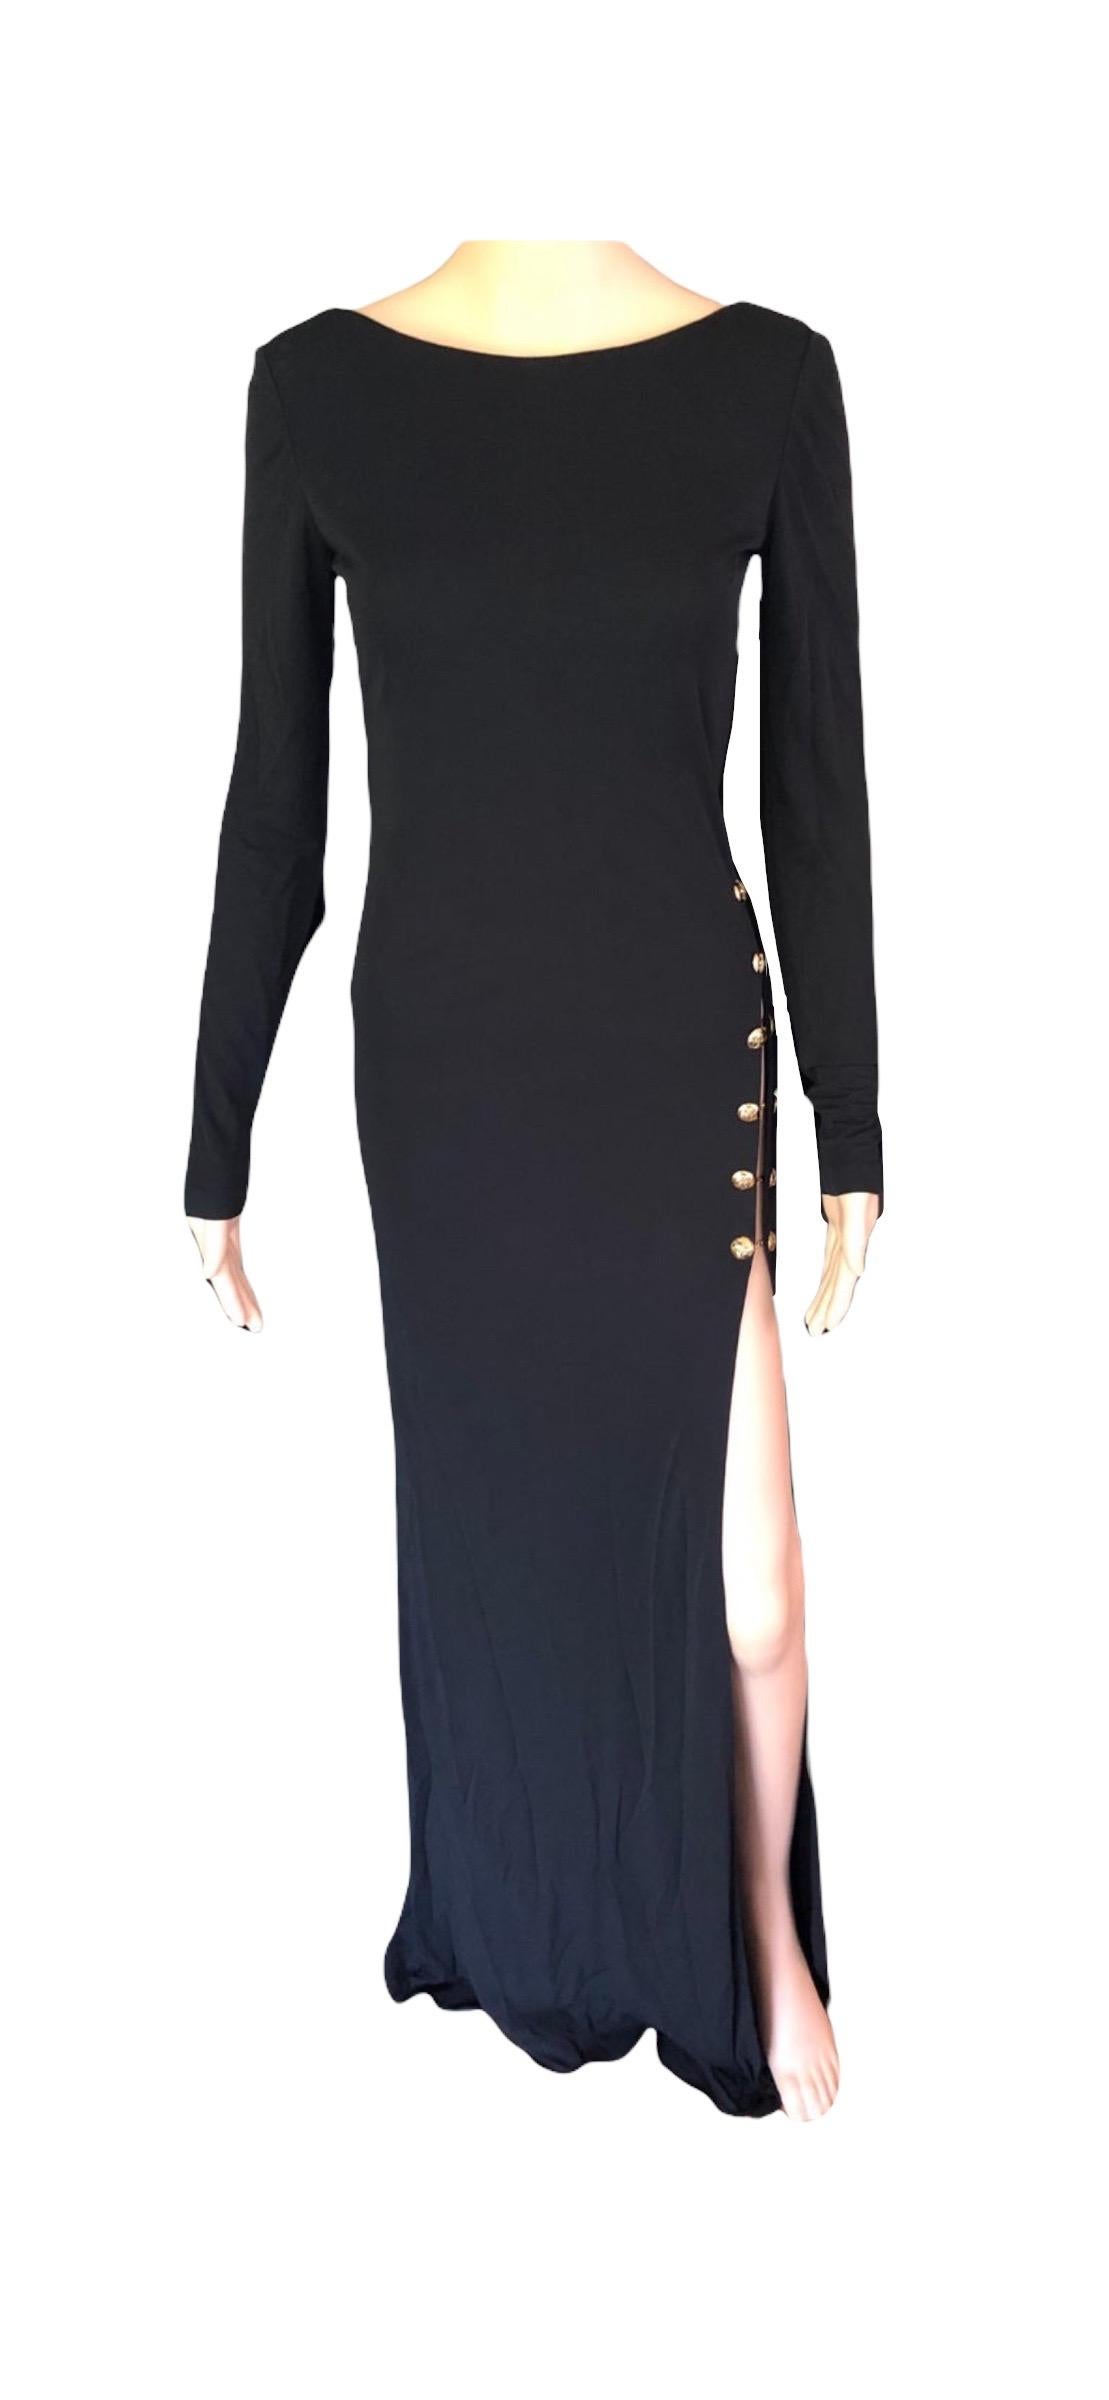 Emilio Pucci Chain Embellished Cutout Open Back Black Evening Dress Gown For Sale 5